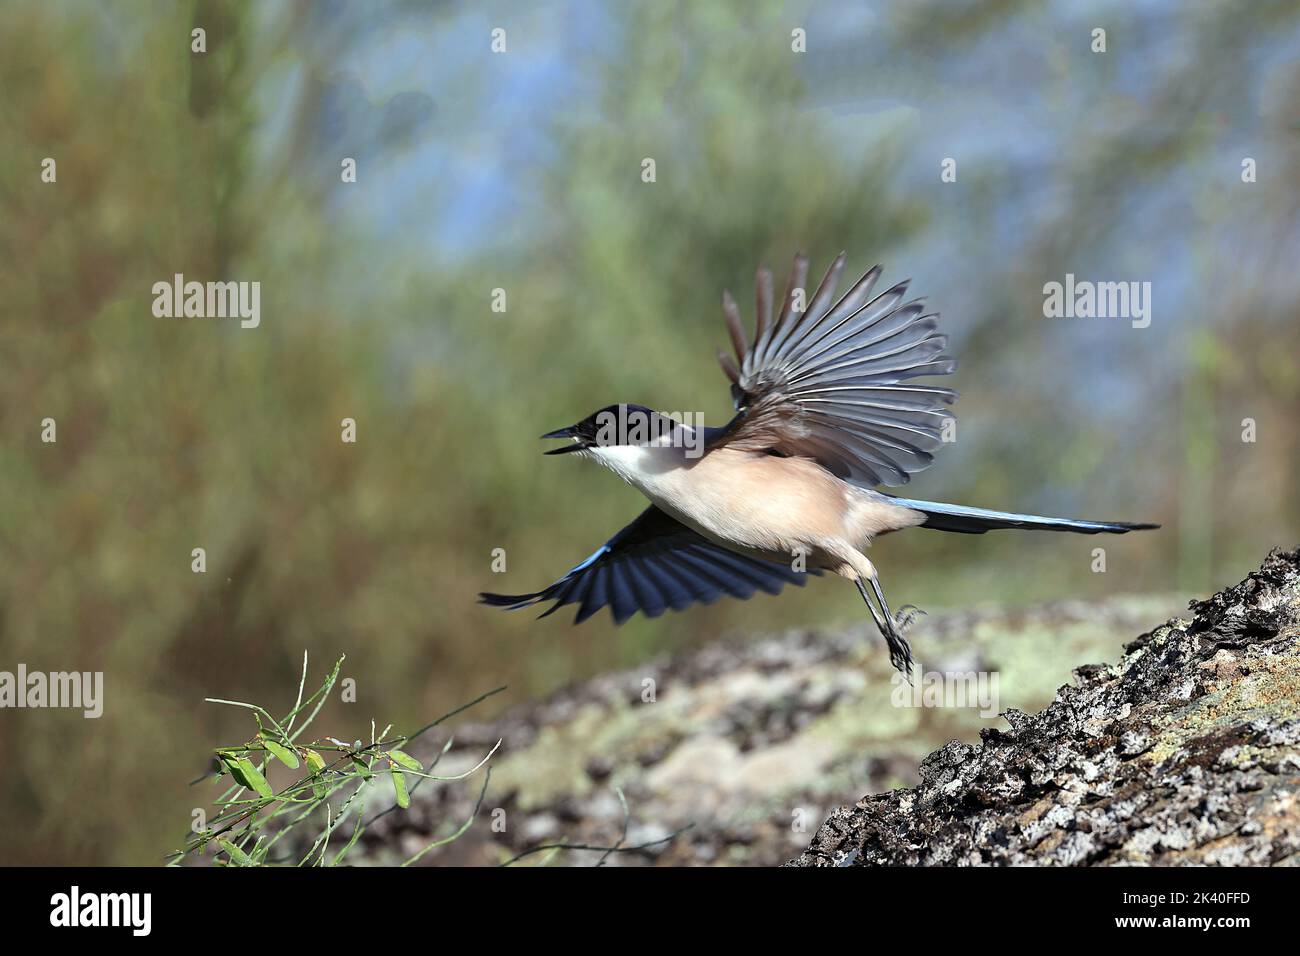 Iberian azure-winged magpie (Cyanopica cooki), takes off a stone with fodder in the bill, Spain, Extremadura, Caceres Stock Photo